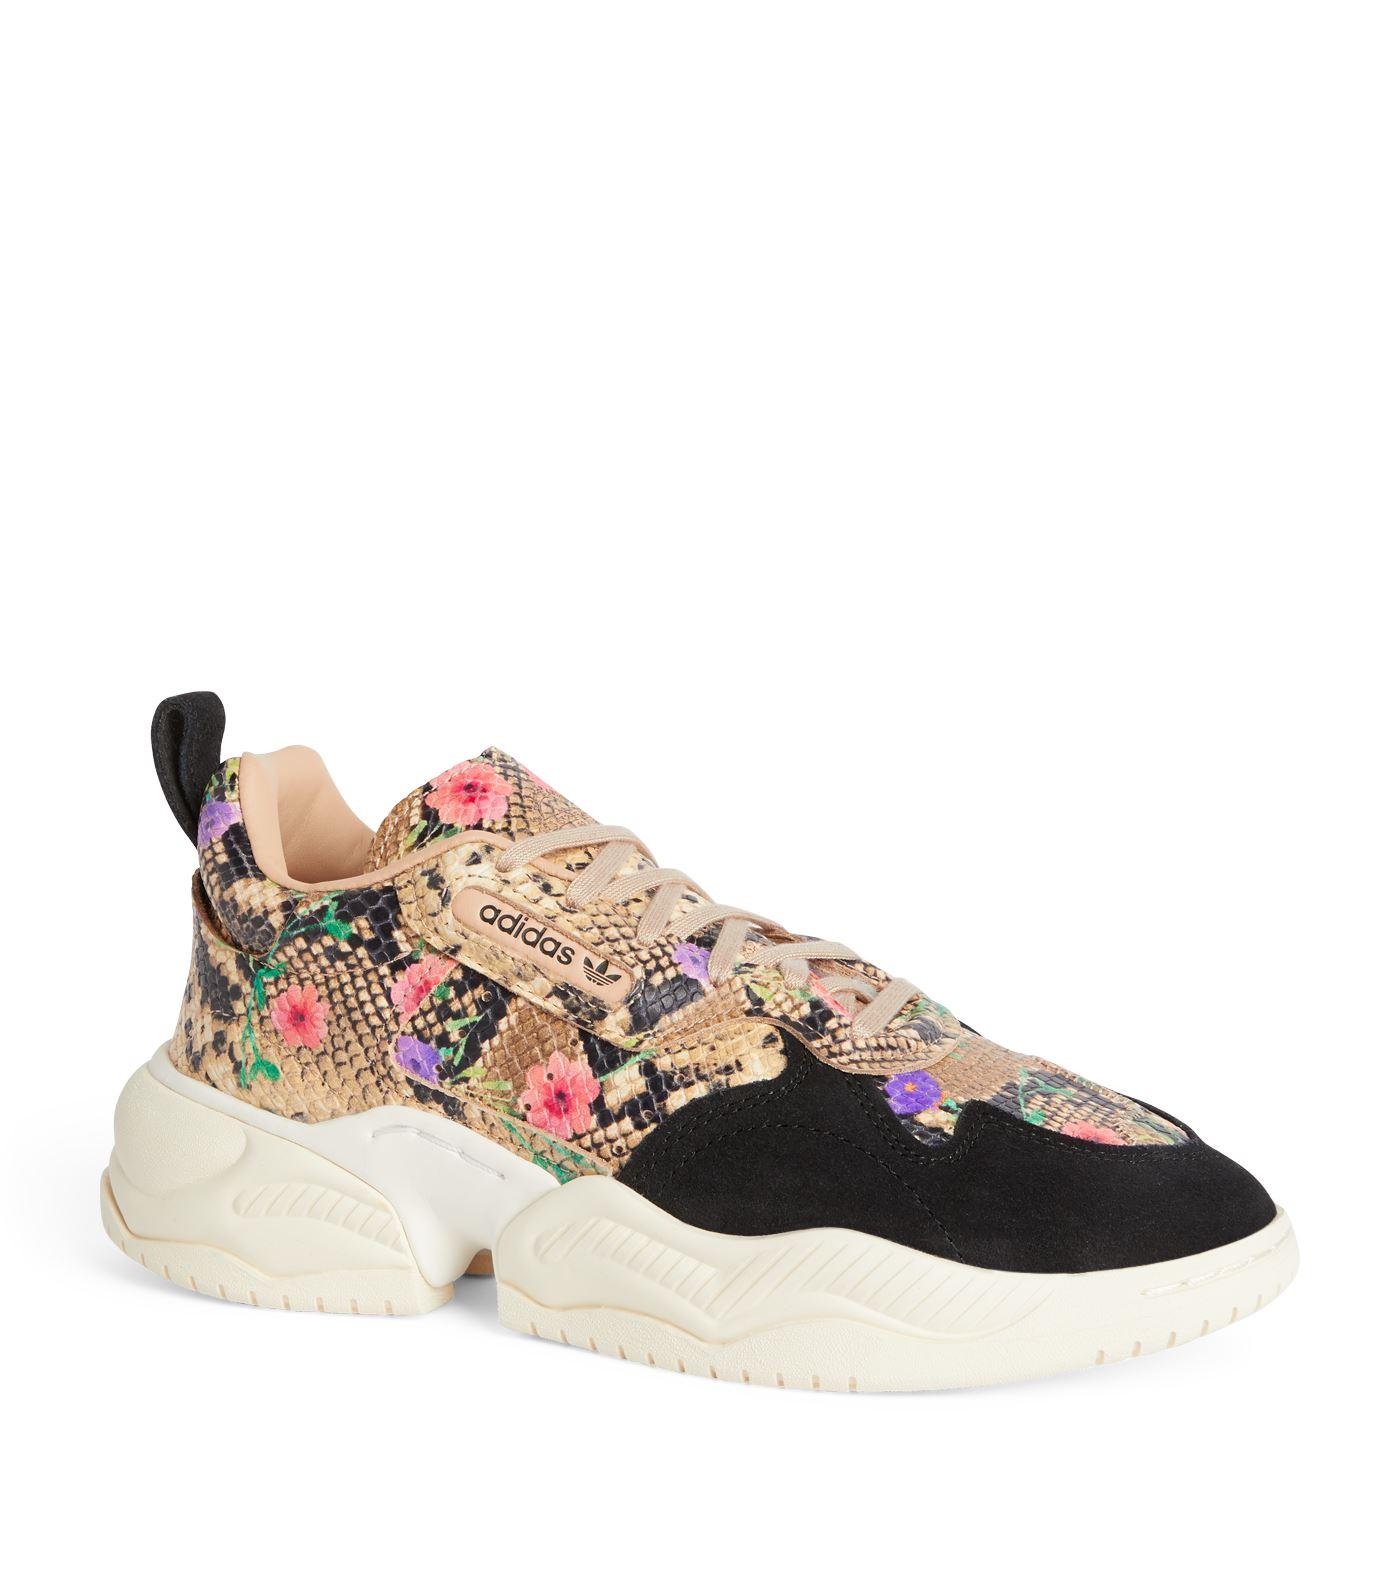 adidas Originals Leather Embellished Supercourt Rx Sneakers in ...